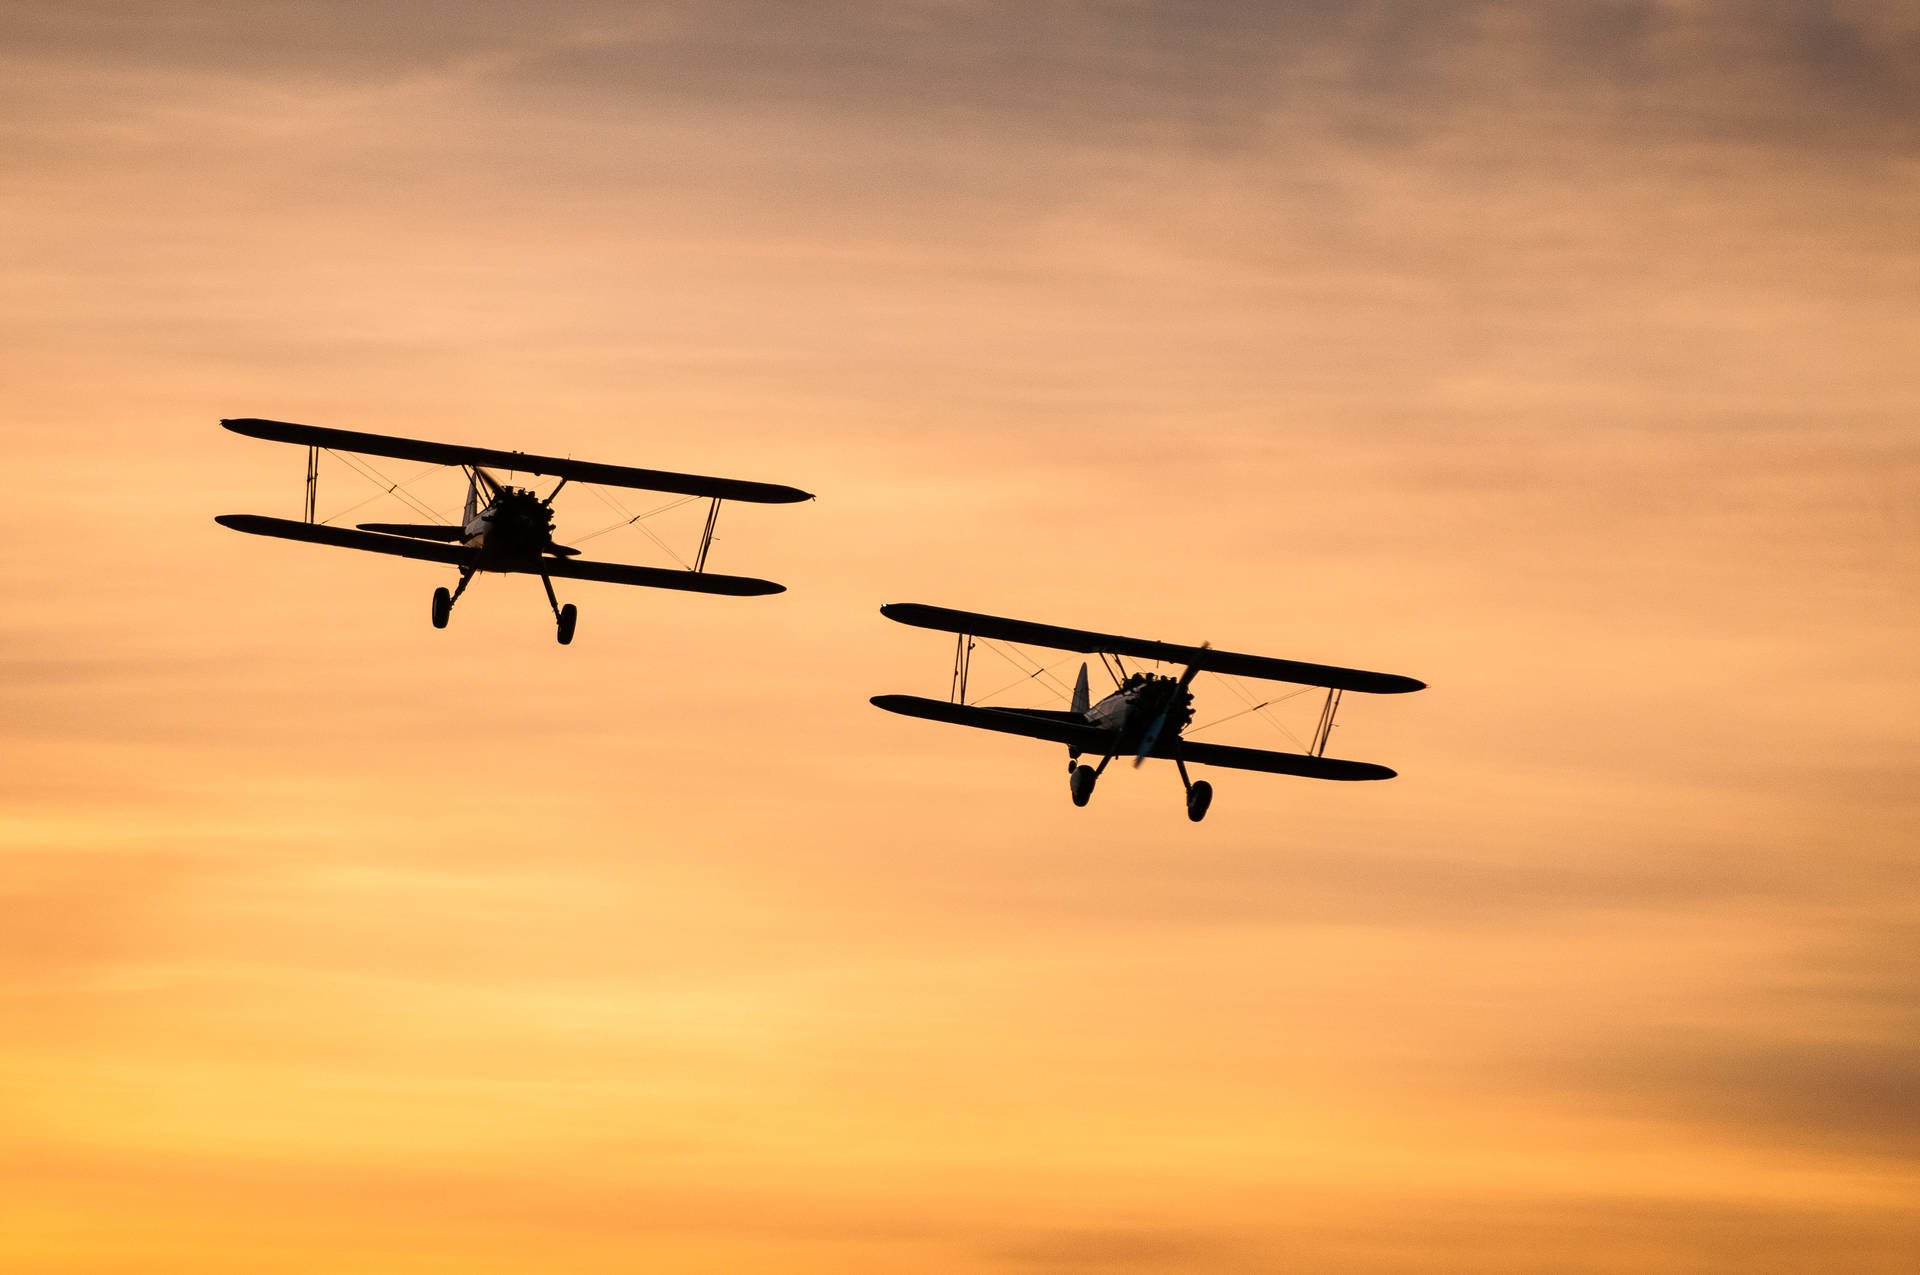 Small Planes In Sunset Sky Wallpaper